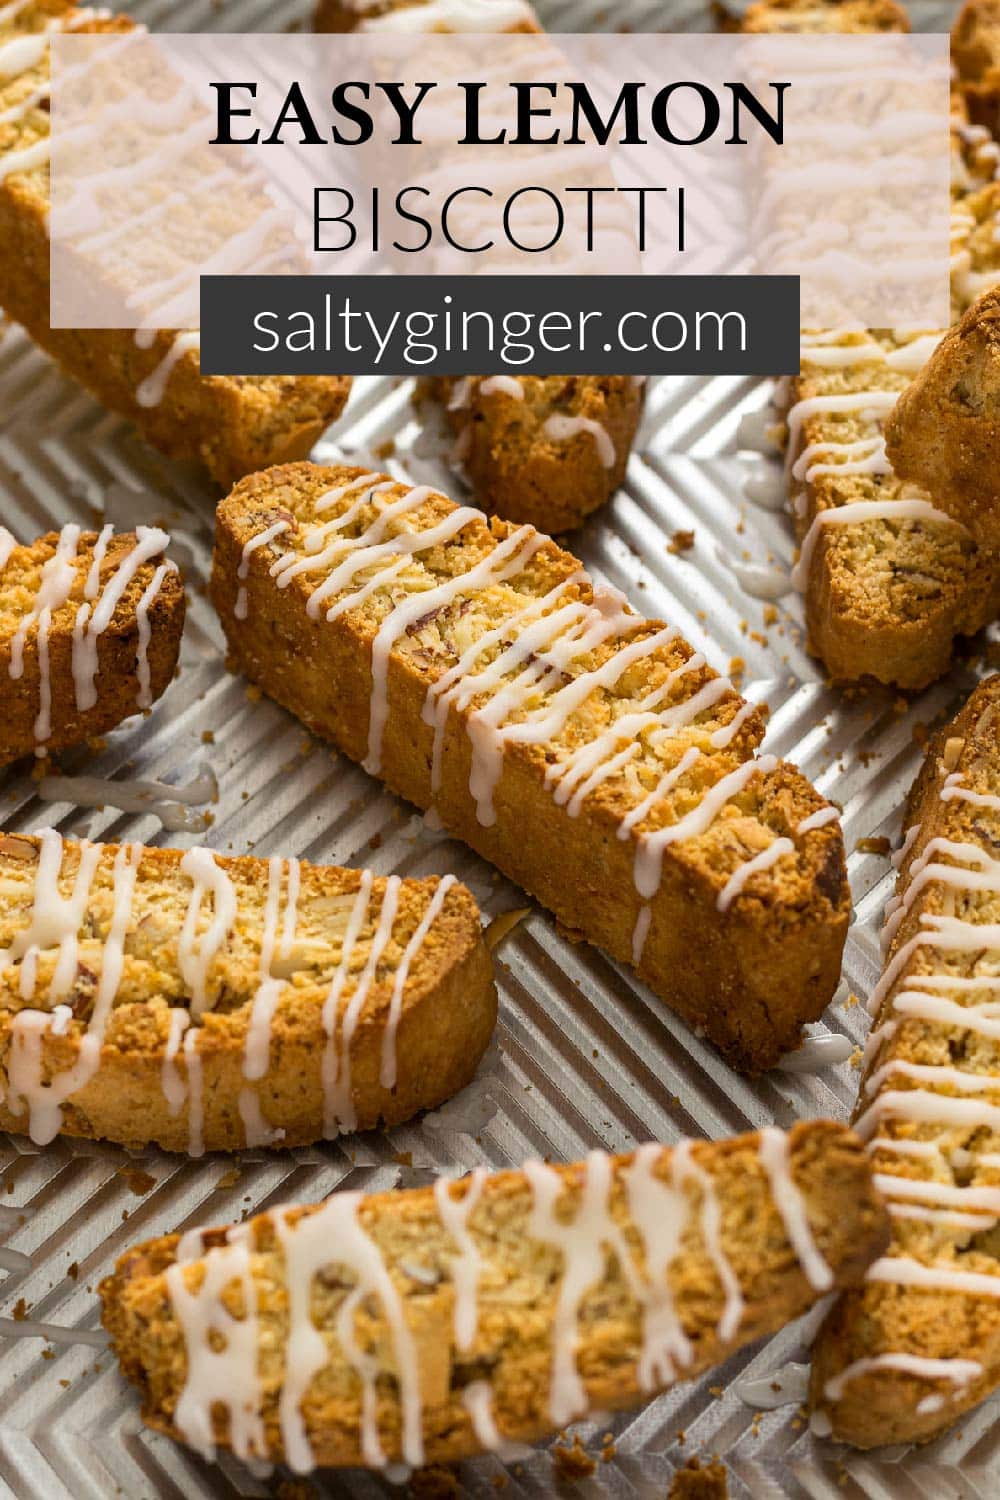 Pin - Easy Lemon Biscotti with a glaze on a baking tray.